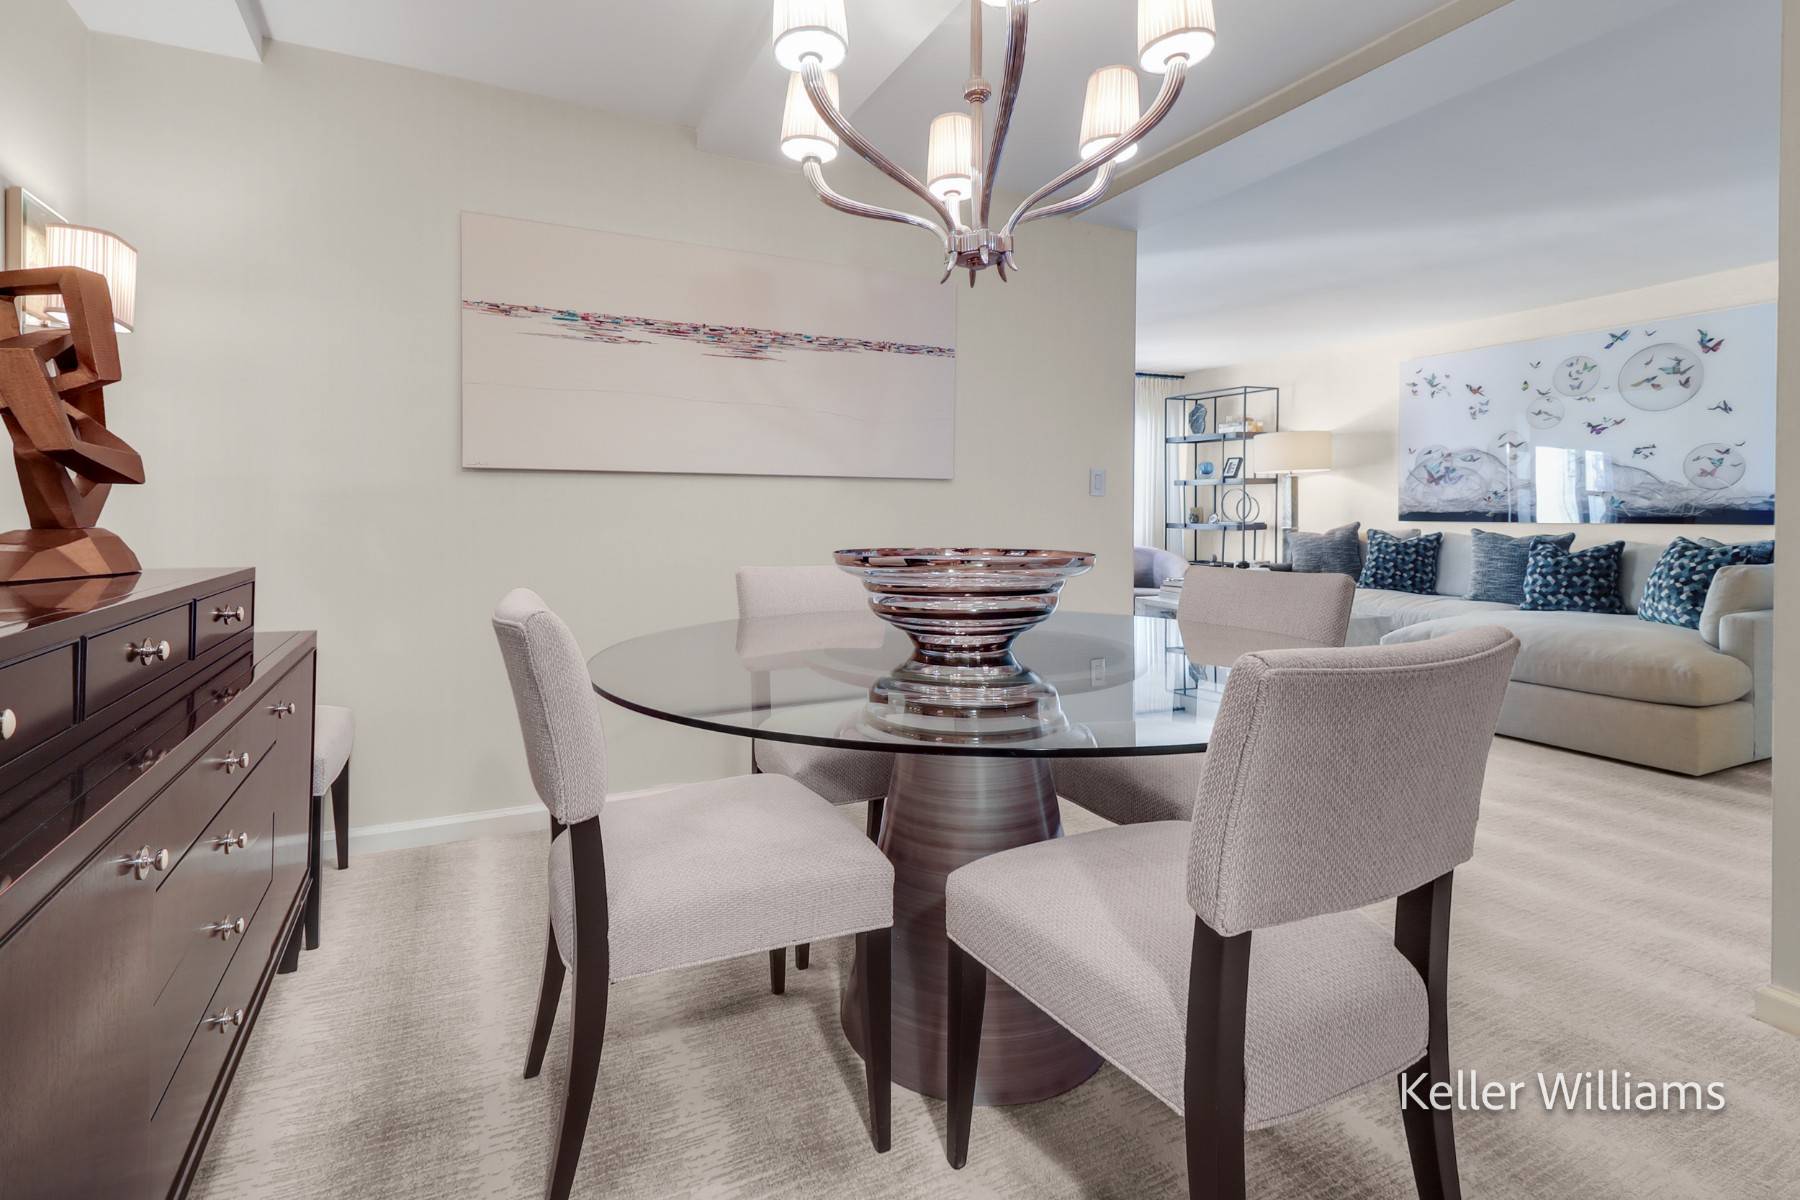 EXPANSIVE HOME RARELY AVAILABLE Welcome to the opportunity to own an enormous two bedroom plus dining room at the Bryn Mawr in the heart of the Upper East Side.